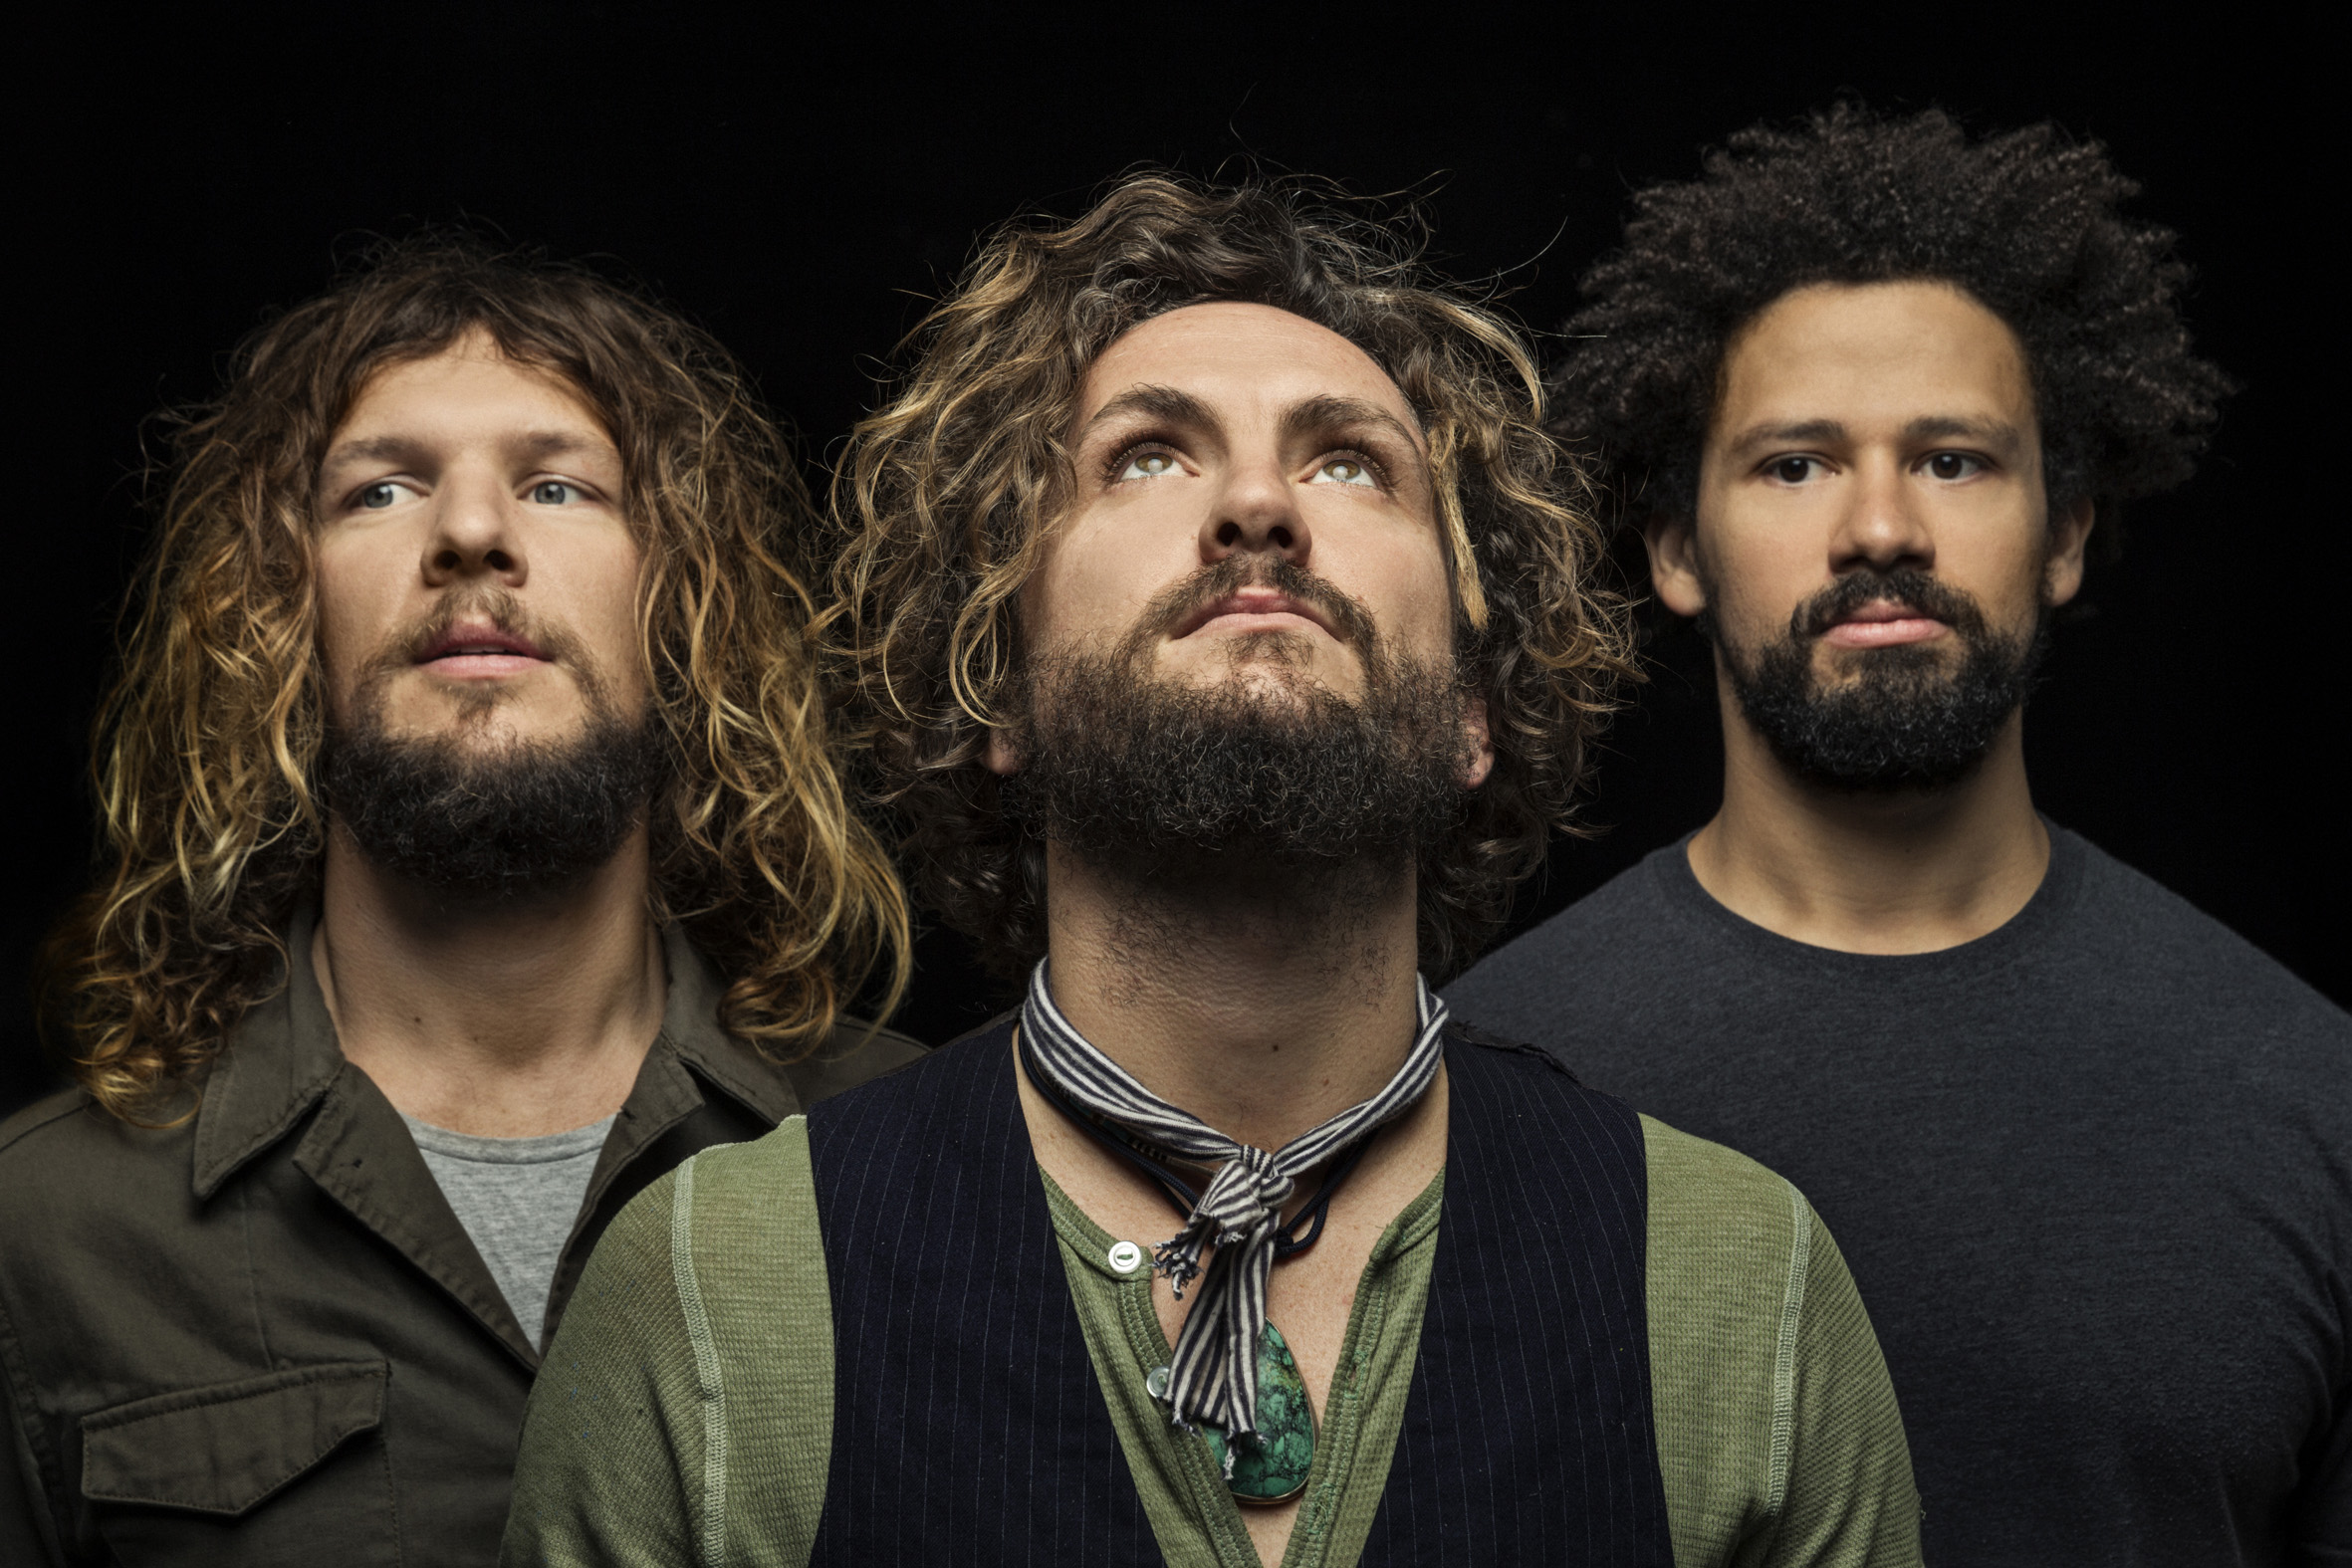 John Butler Trio introduce ‘Flesh & Blood’ With A National Tour For Australian Fans